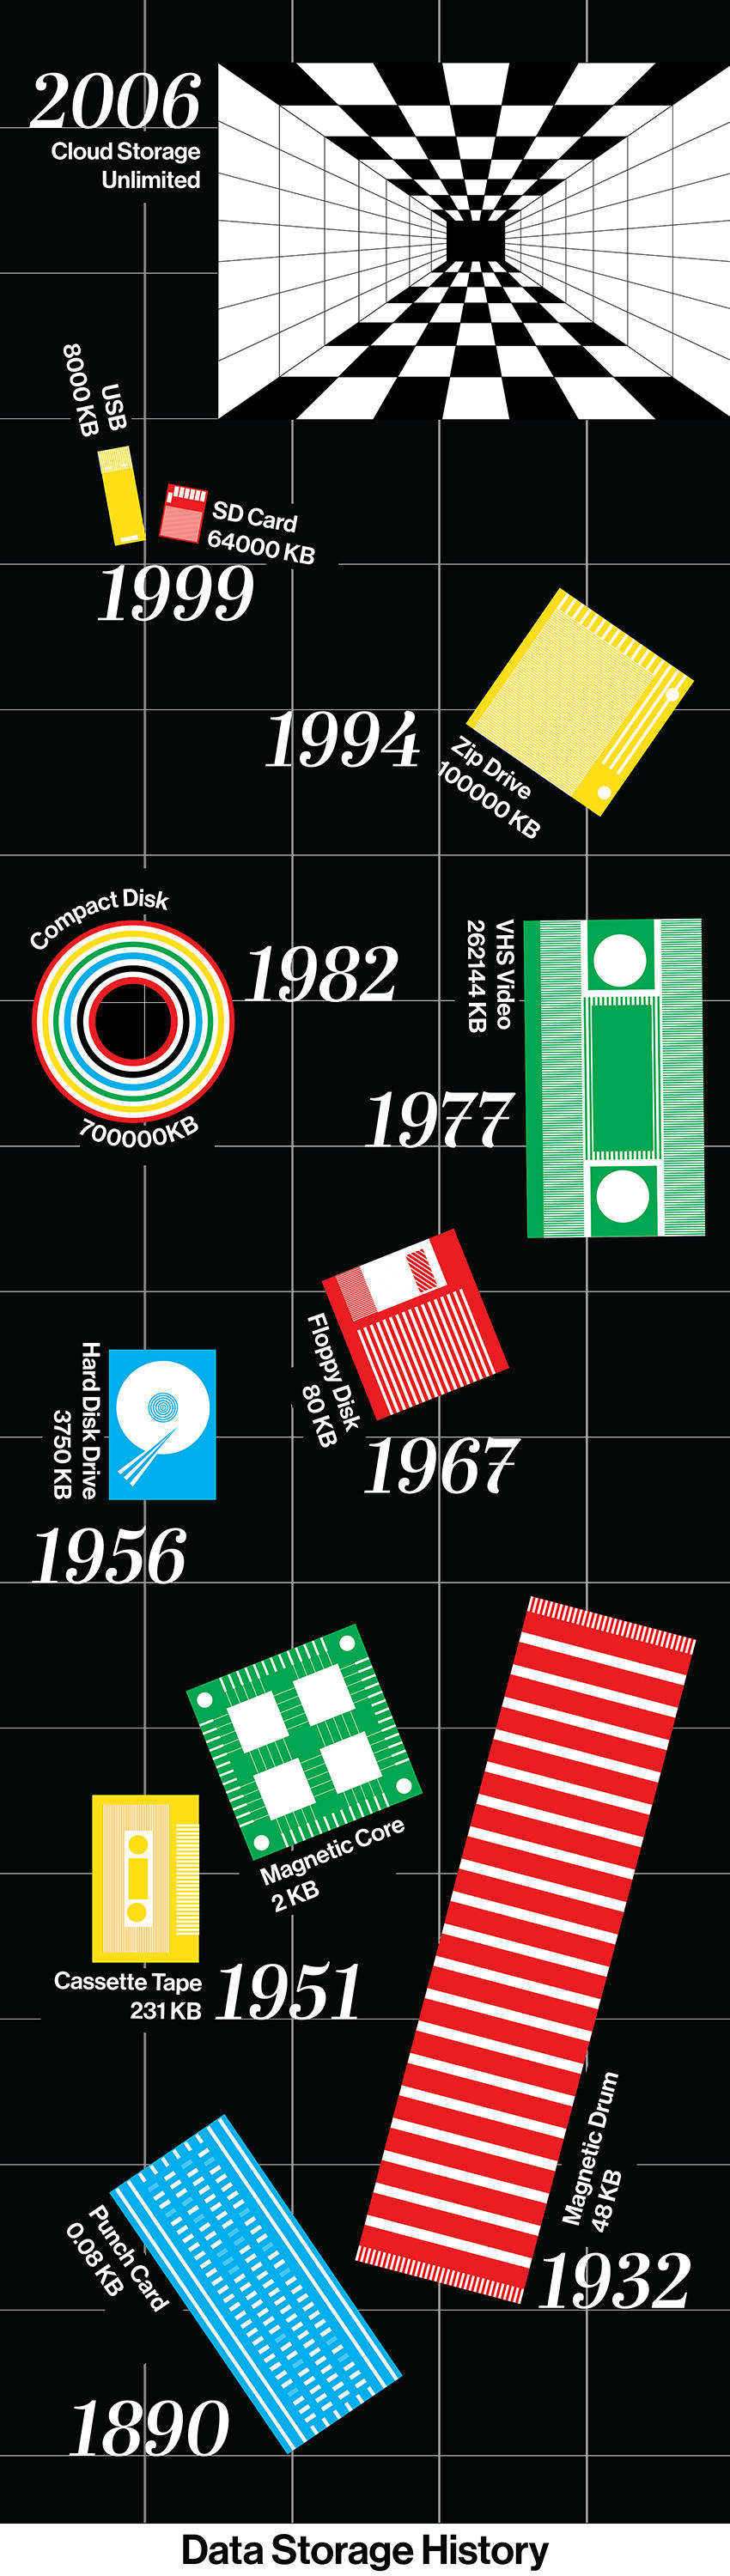 Data storage history by using simplified graphic language started from the punch card and ended at the cloud storage.